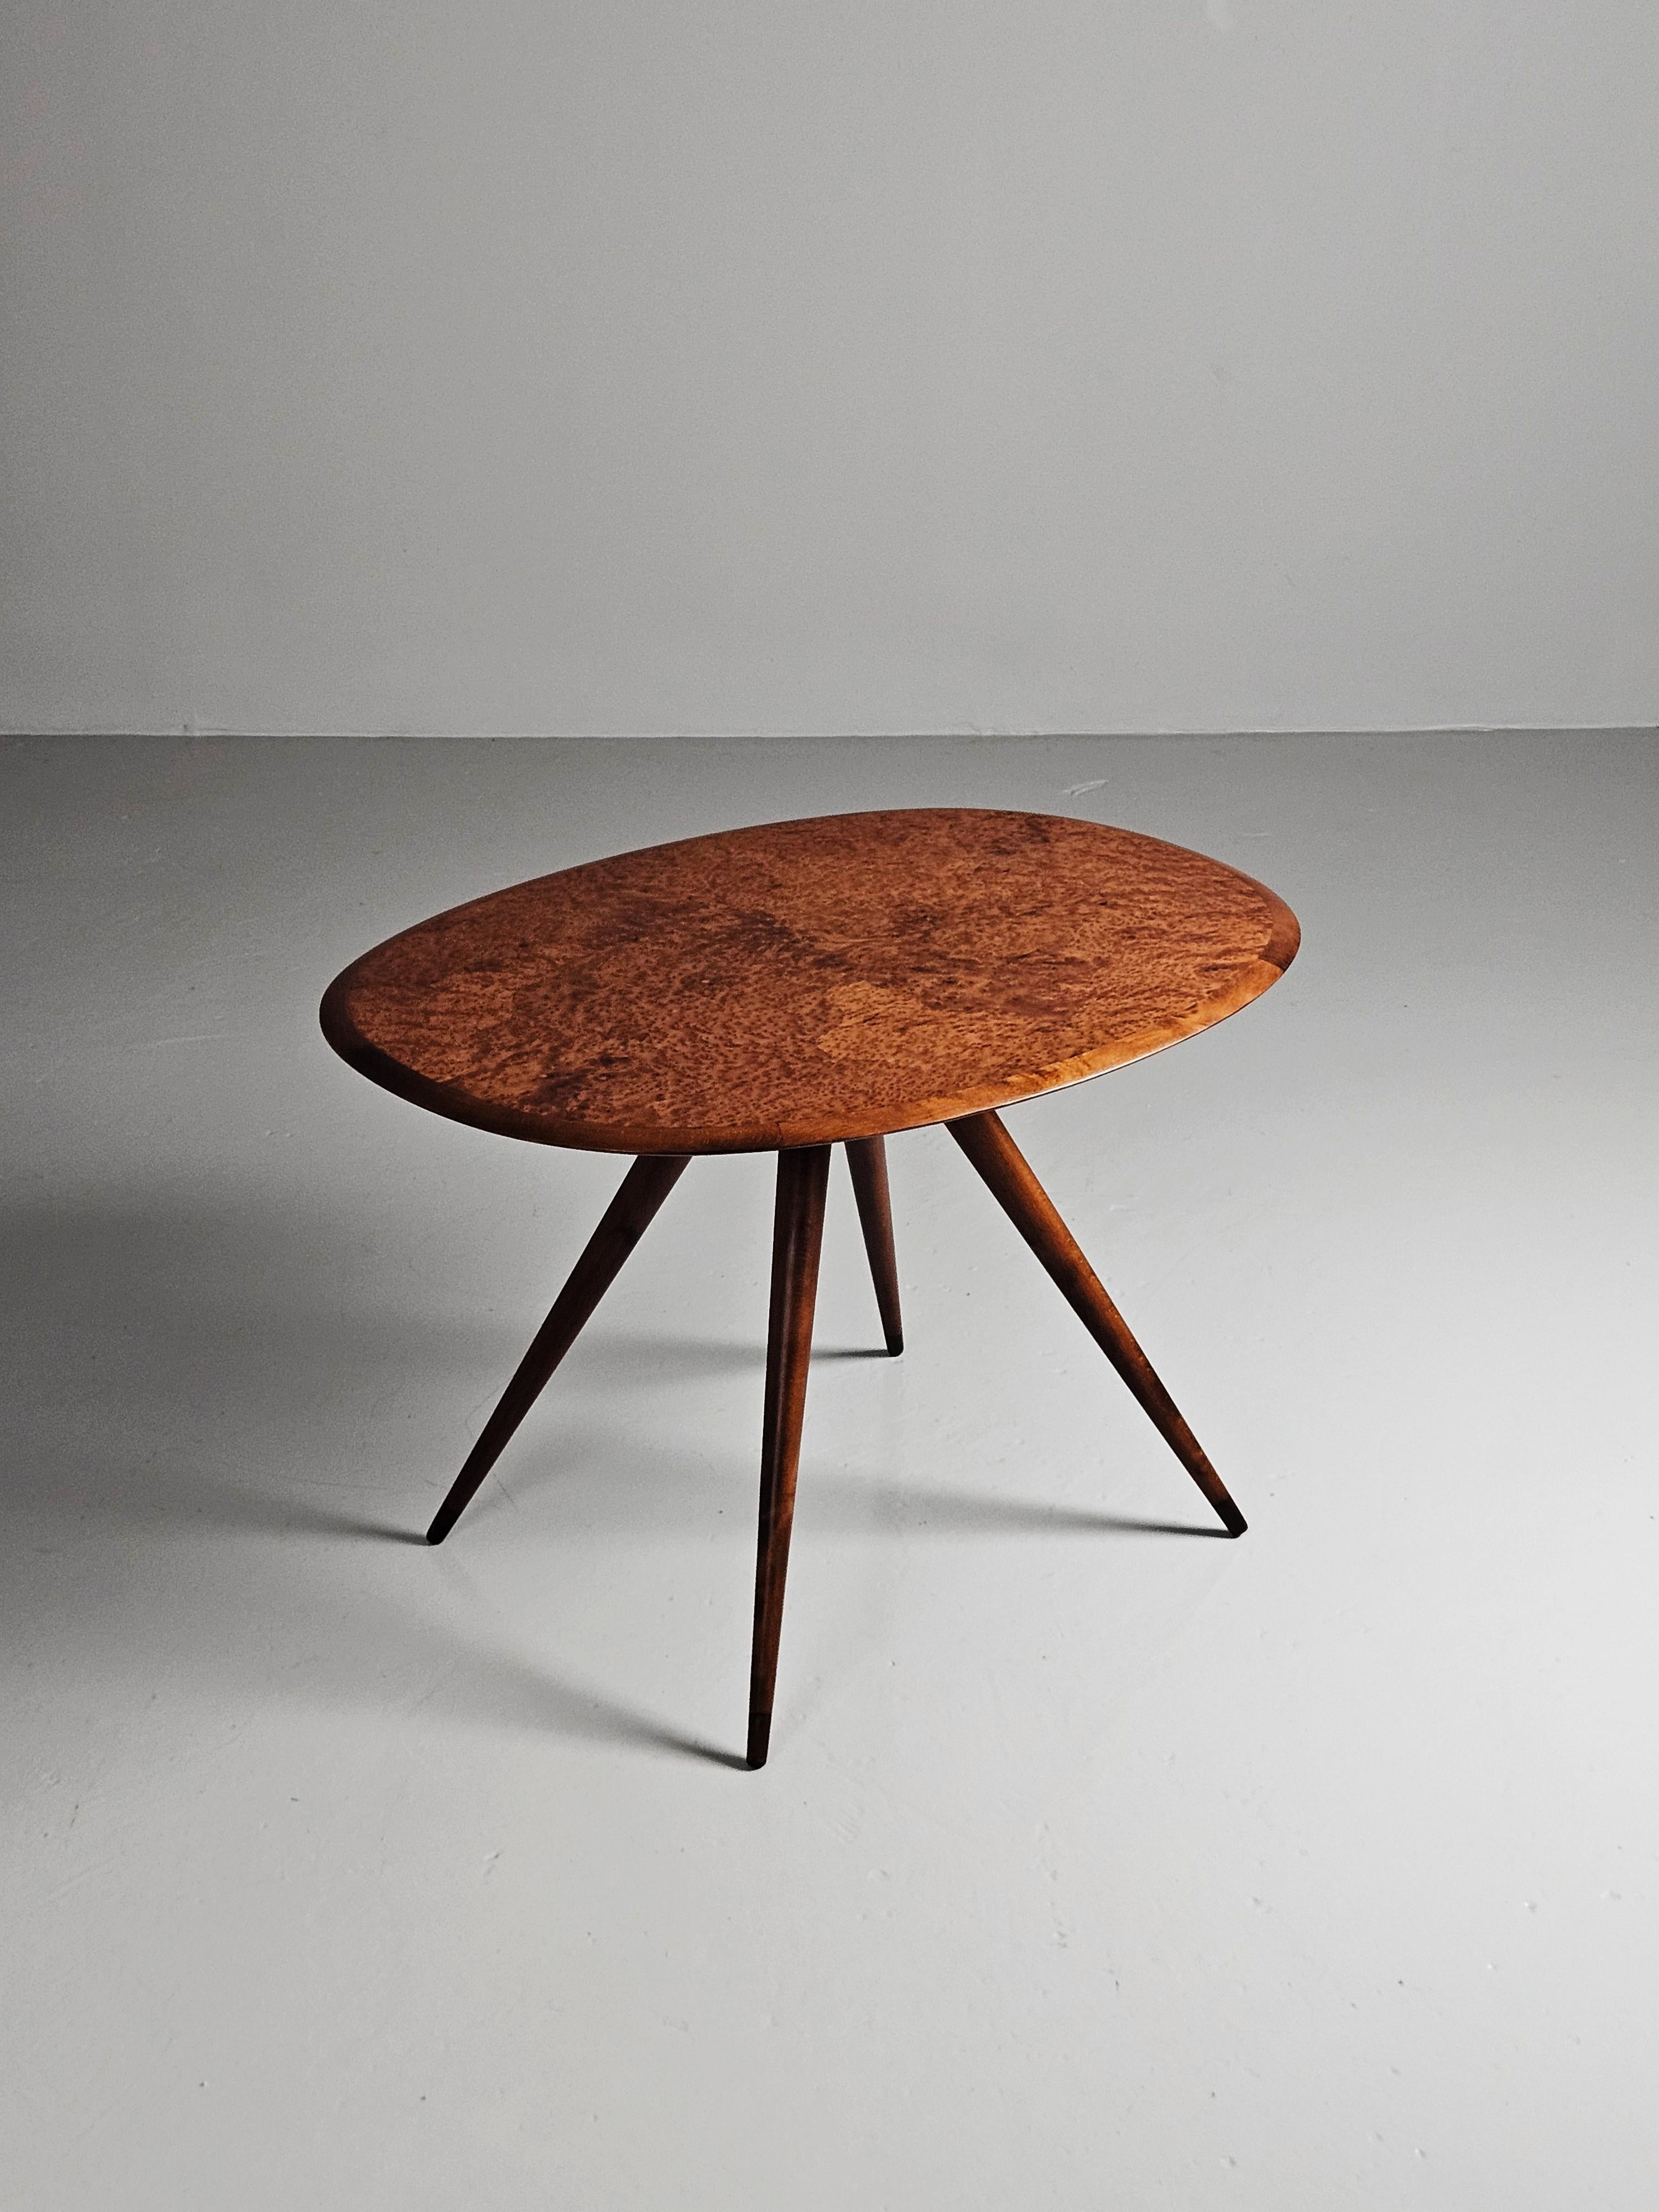 Coffee table in the style of the Swedish designer David Rosén. Modern legs with a classic elm root inlay on the top. 

This table have been gently restored to a very good condition. 